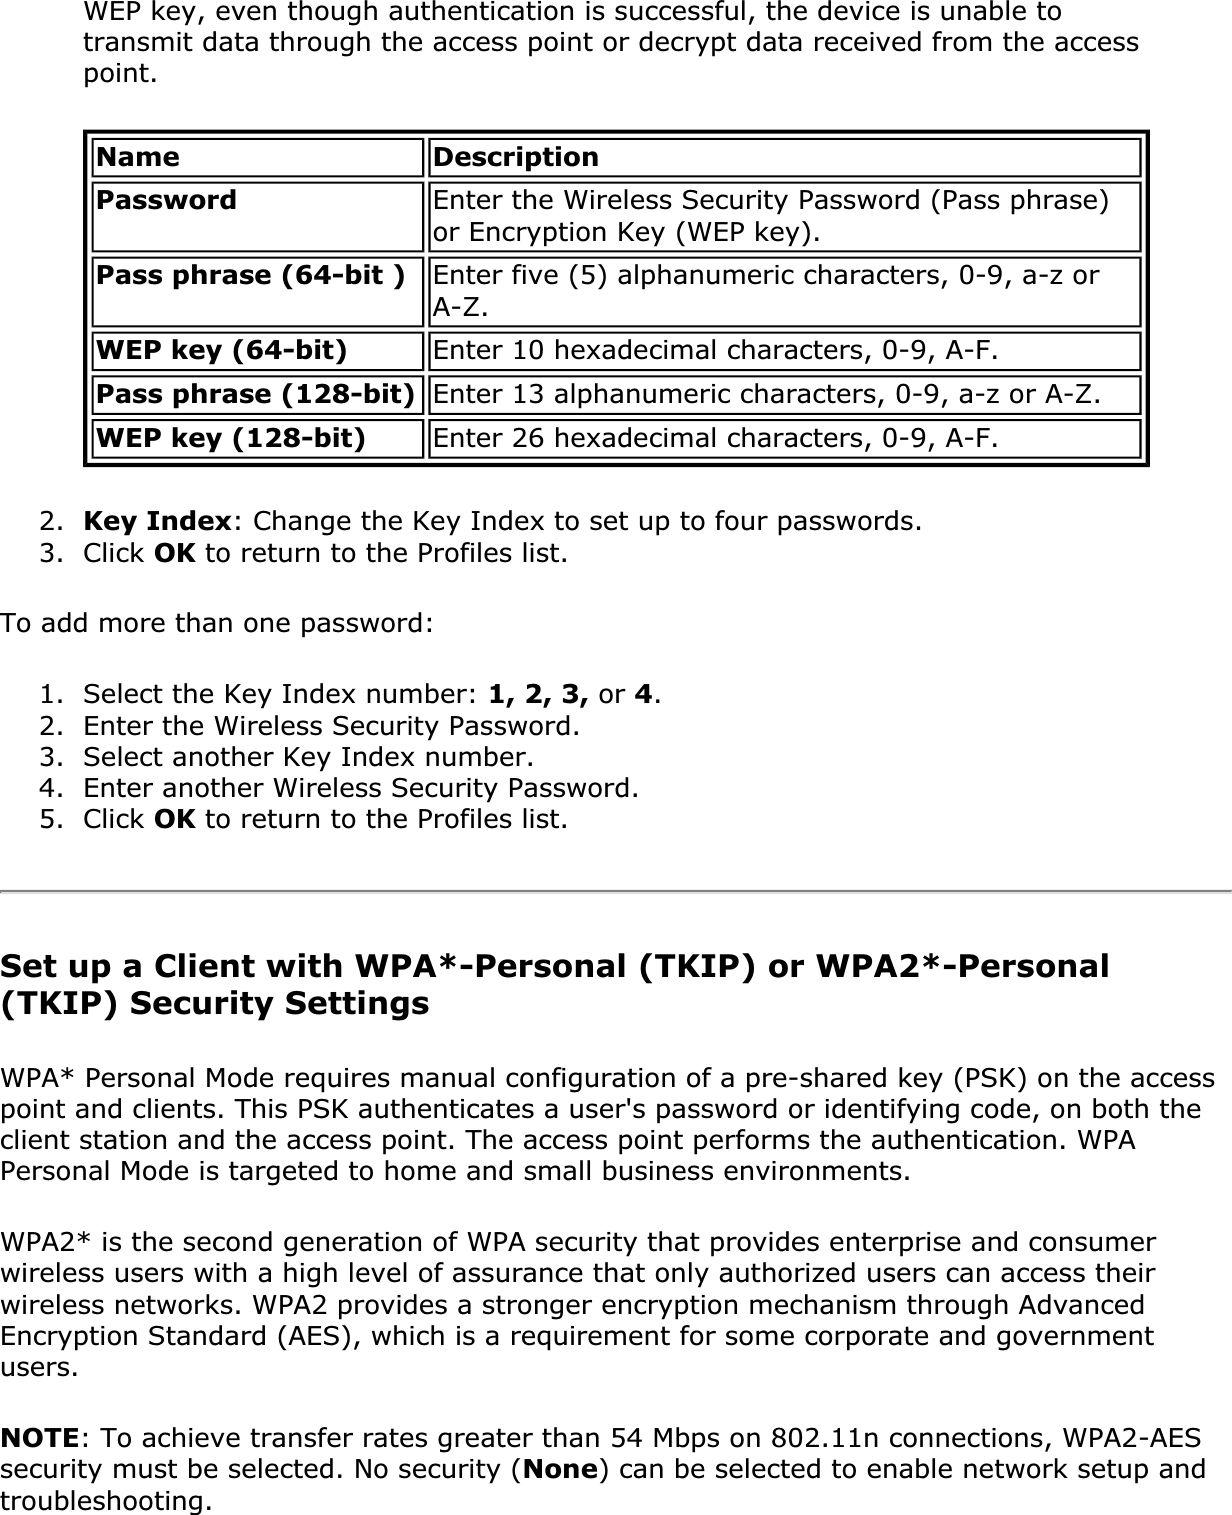 WEP key, even though authentication is successful, the device is unable to transmit data through the access point or decrypt data received from the access point.Name DescriptionPassword Enter the Wireless Security Password (Pass phrase) or Encryption Key (WEP key).Pass phrase (64-bit ) Enter five (5) alphanumeric characters, 0-9, a-z or A-Z.WEP key (64-bit) Enter 10 hexadecimal characters, 0-9, A-F.Pass phrase (128-bit) Enter 13 alphanumeric characters, 0-9, a-z or A-Z.WEP key (128-bit) Enter 26 hexadecimal characters, 0-9, A-F.2. Key Index: Change the Key Index to set up to four passwords.3. Click OK to return to the Profiles list.To add more than one password:1. Select the Key Index number: 1, 2, 3, or 4.2. Enter the Wireless Security Password.3. Select another Key Index number.4. Enter another Wireless Security Password.5. Click OK to return to the Profiles list.Set up a Client with WPA*-Personal (TKIP) or WPA2*-Personal (TKIP) Security SettingsWPA* Personal Mode requires manual configuration of a pre-shared key (PSK) on the access point and clients. This PSK authenticates a user&apos;s password or identifying code, on both the client station and the access point. The access point performs the authentication. WPA Personal Mode is targeted to home and small business environments. WPA2* is the second generation of WPA security that provides enterprise and consumer wireless users with a high level of assurance that only authorized users can access their wireless networks. WPA2 provides a stronger encryption mechanism through Advanced Encryption Standard (AES), which is a requirement for some corporate and government users.NOTE: To achieve transfer rates greater than 54 Mbps on 802.11n connections, WPA2-AES security must be selected. No security (None) can be selected to enable network setup and troubleshooting.